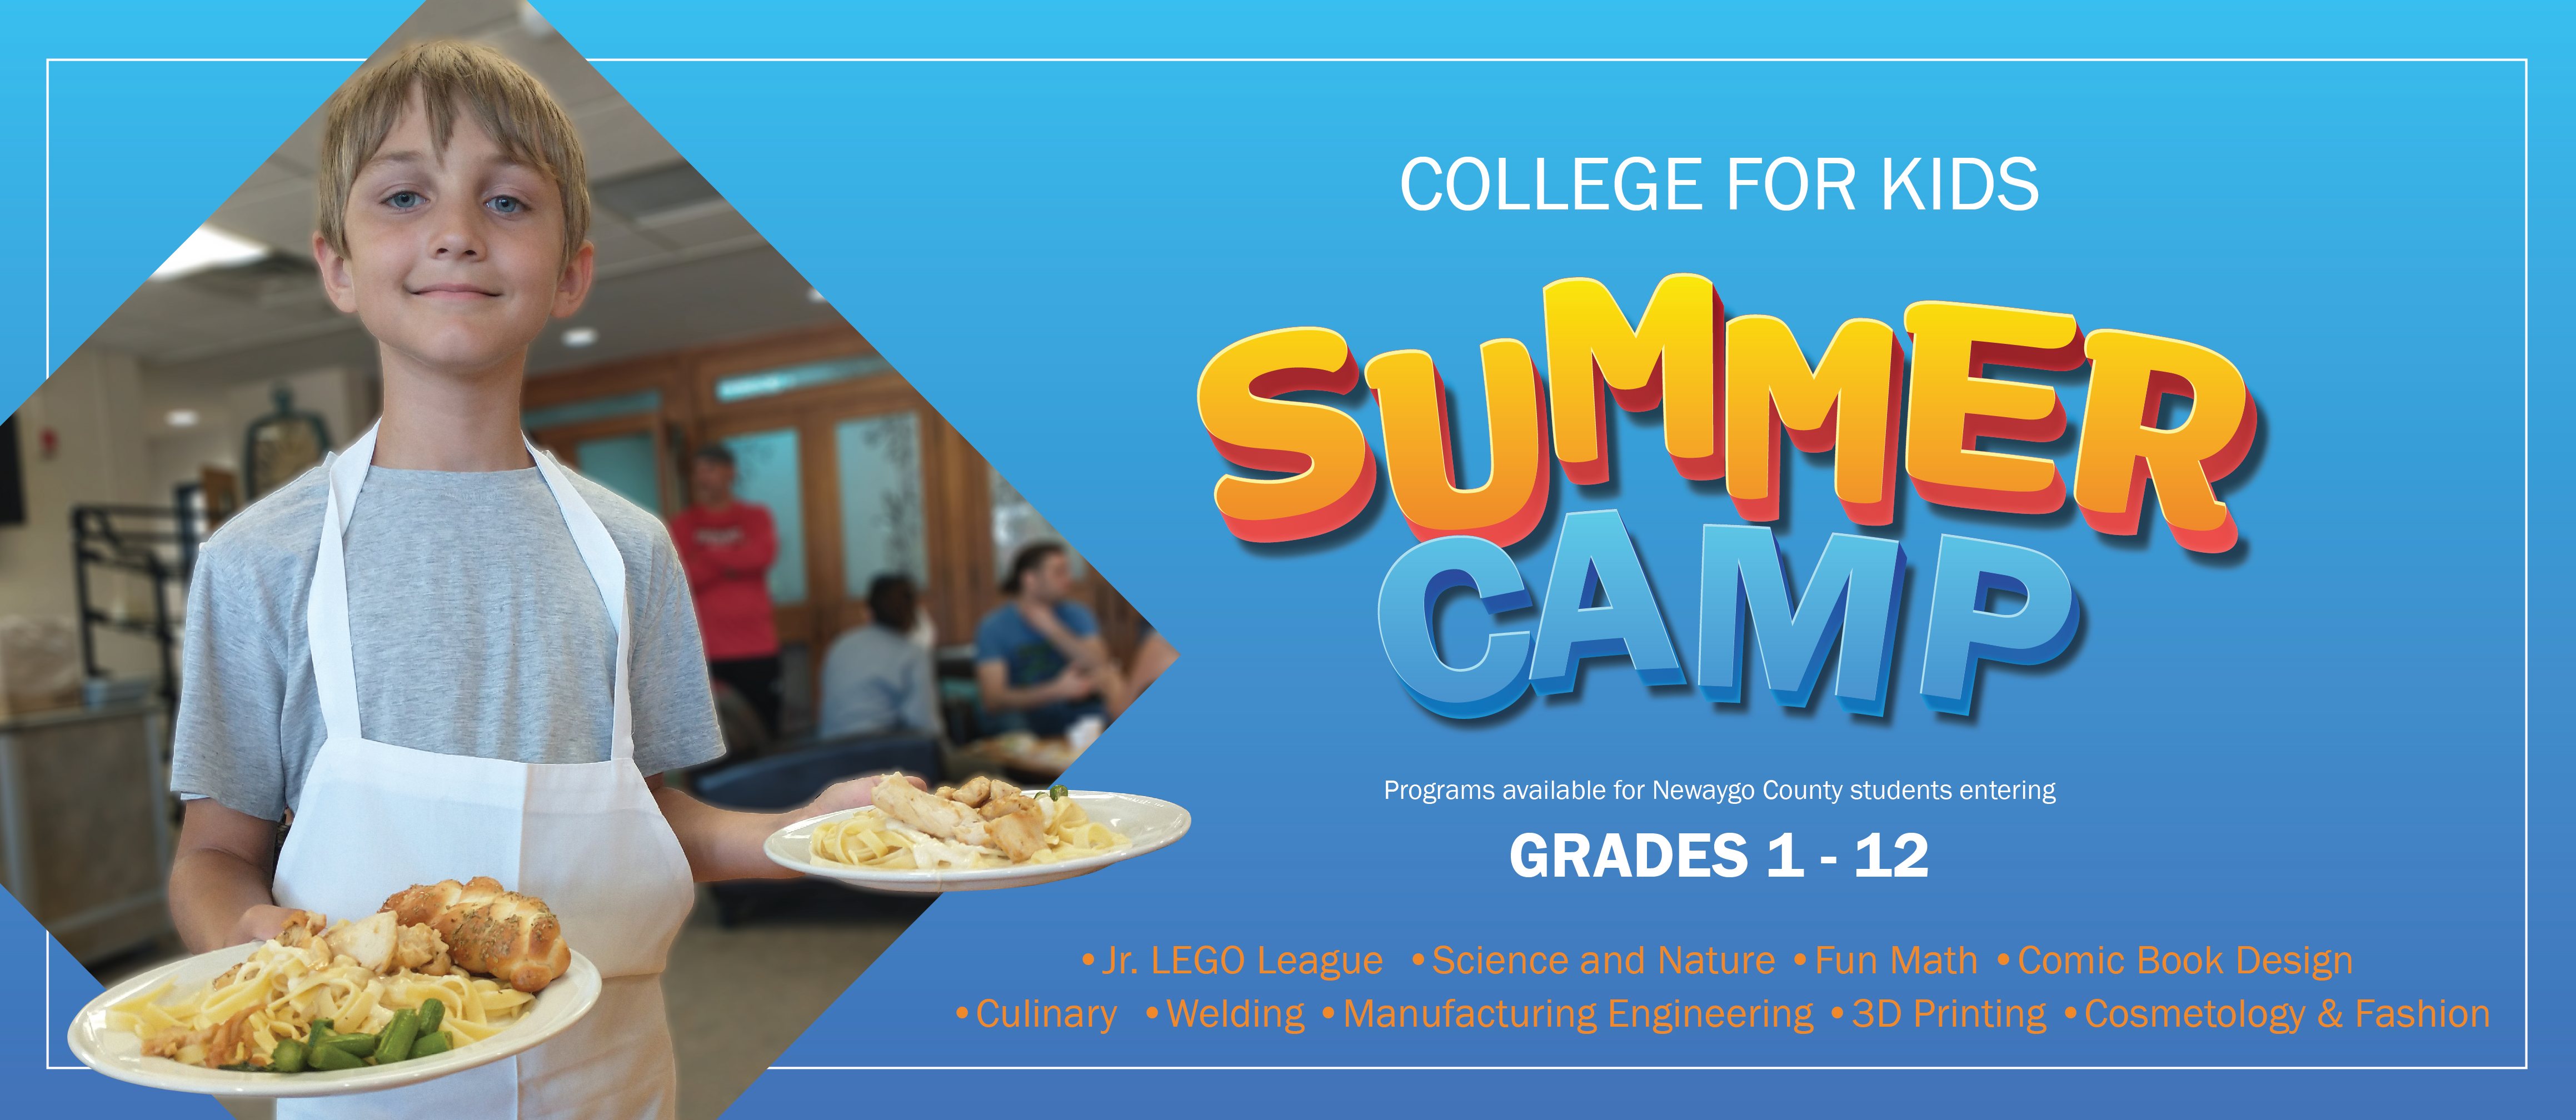 College for Kids, Summer Camp. Programs available for Newaygo County Students entering grades 1 - 12.